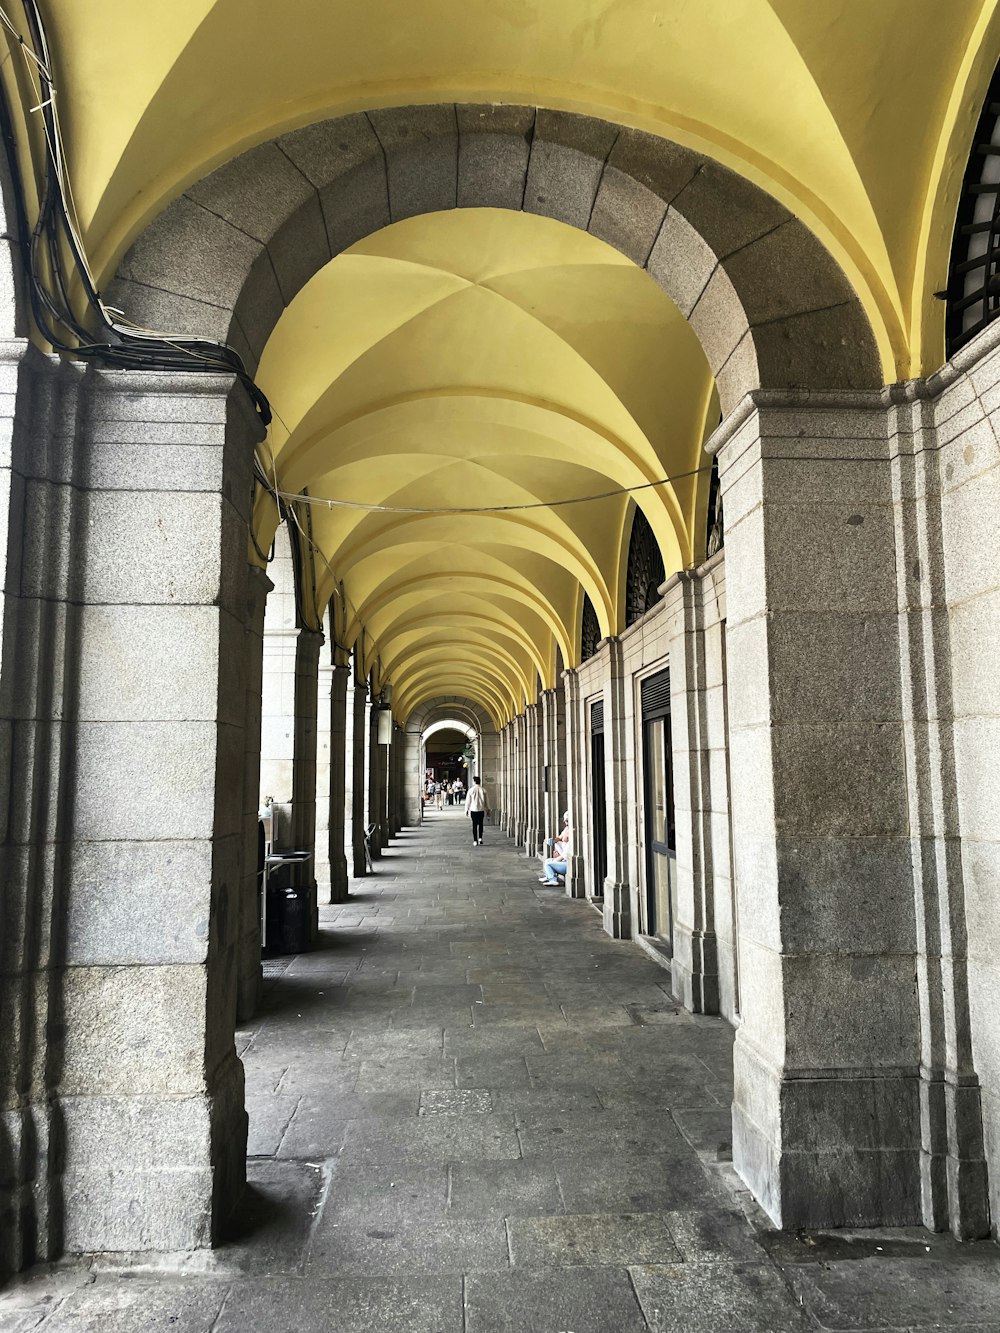 a row of arches on the side of a building